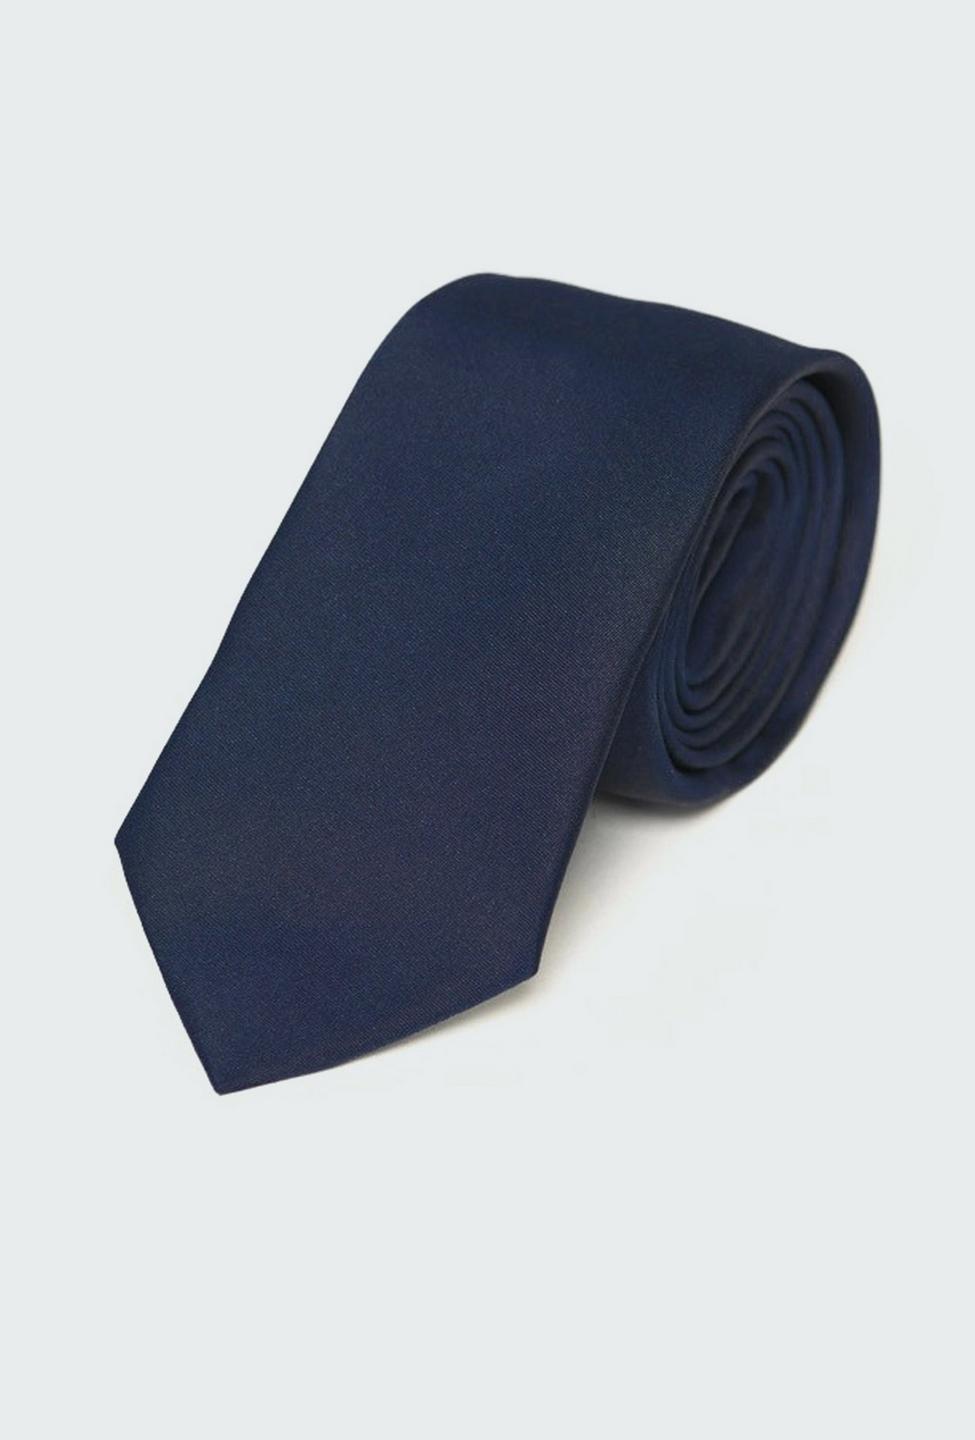 Blue tie - Solid Design from Premium Indochino Collection